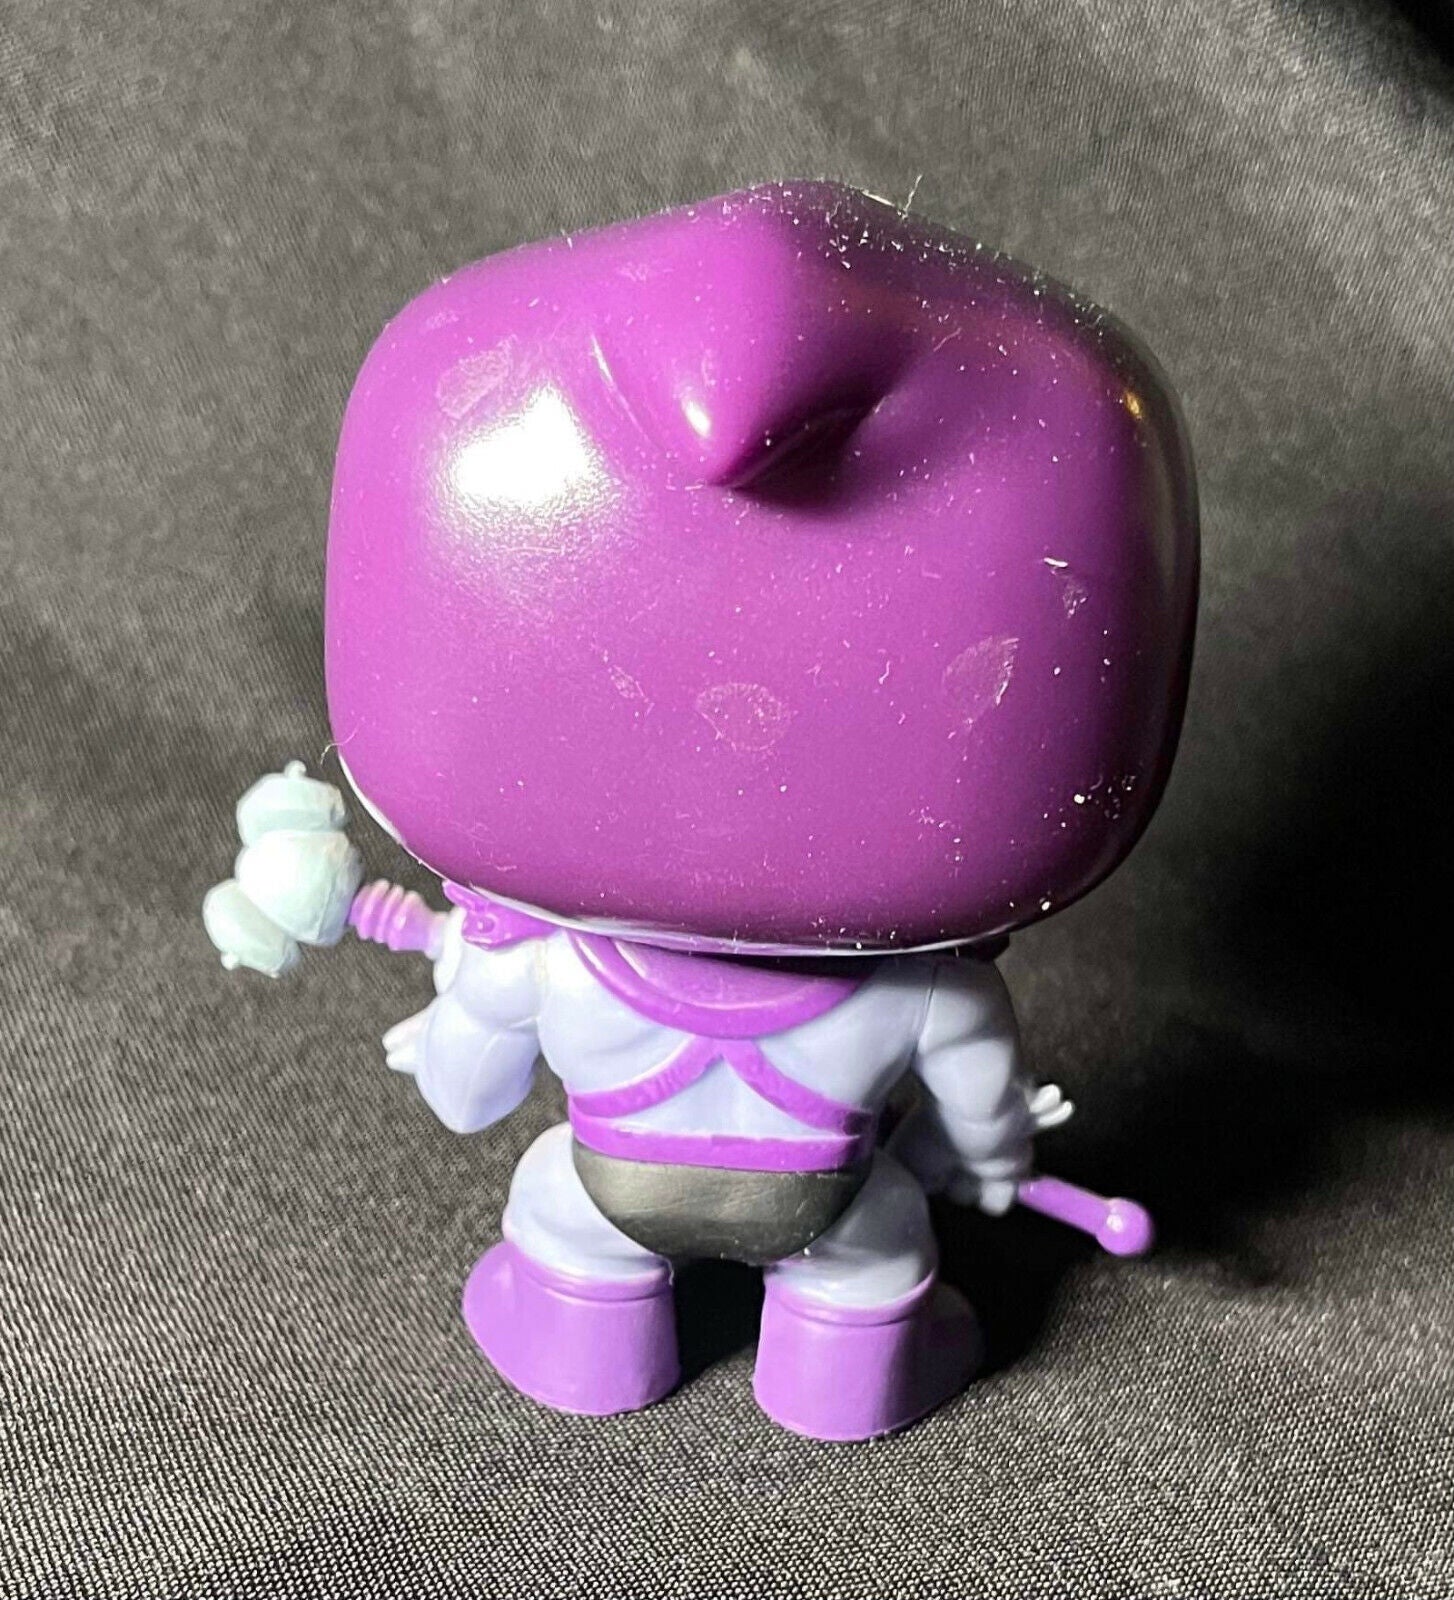 Funko Pop! Masters of the Universe Skeletor Funko Pop #19 Vaulted (Loose)